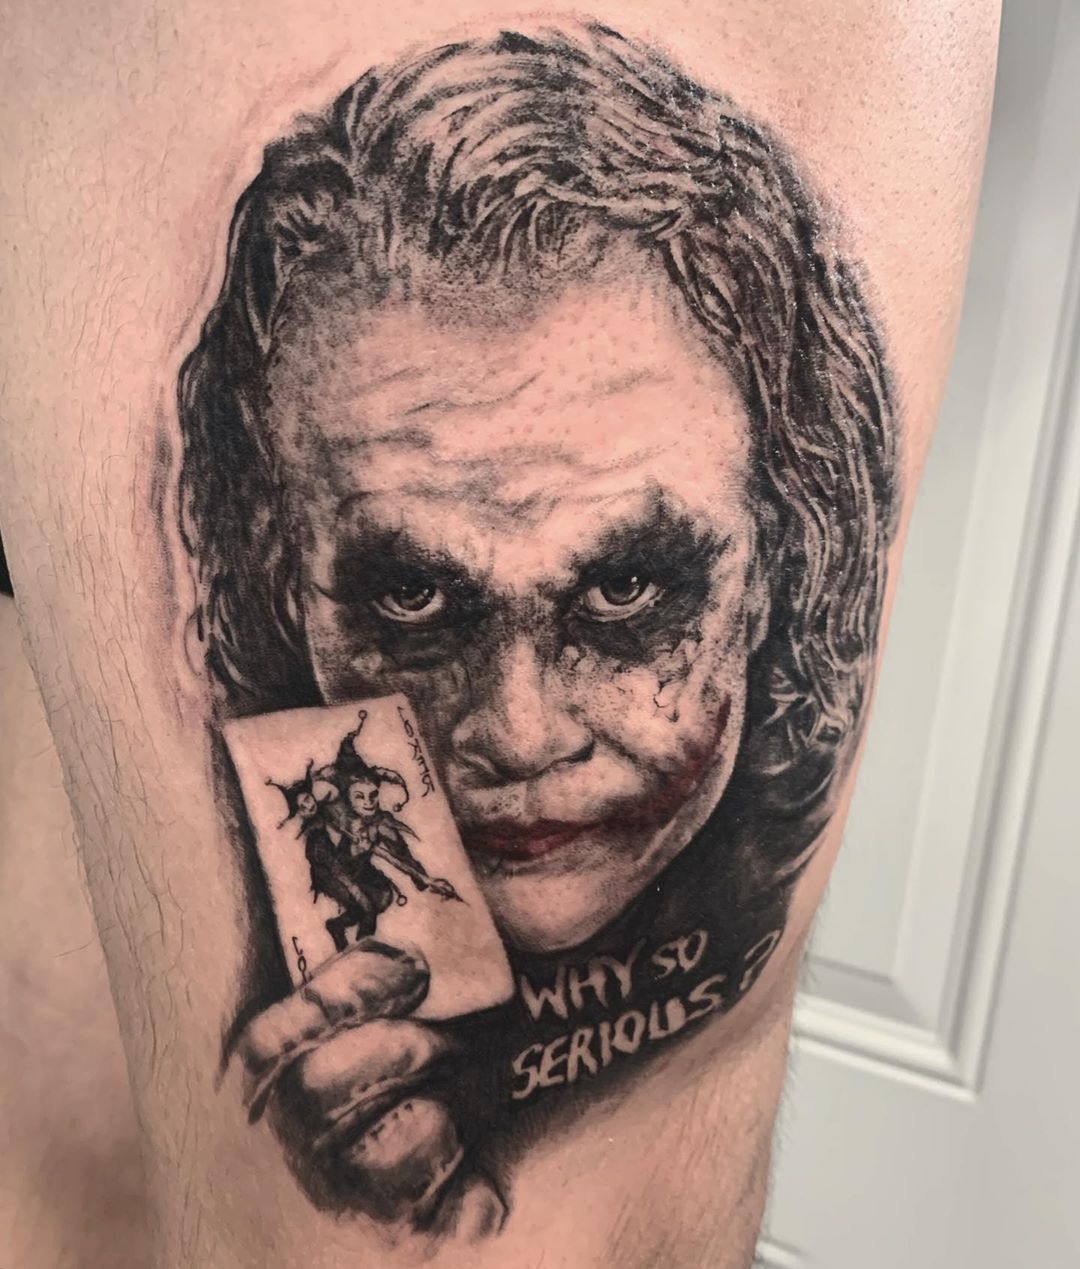 Joker Card Tattoo Meaning Symbolism and Significance Explained